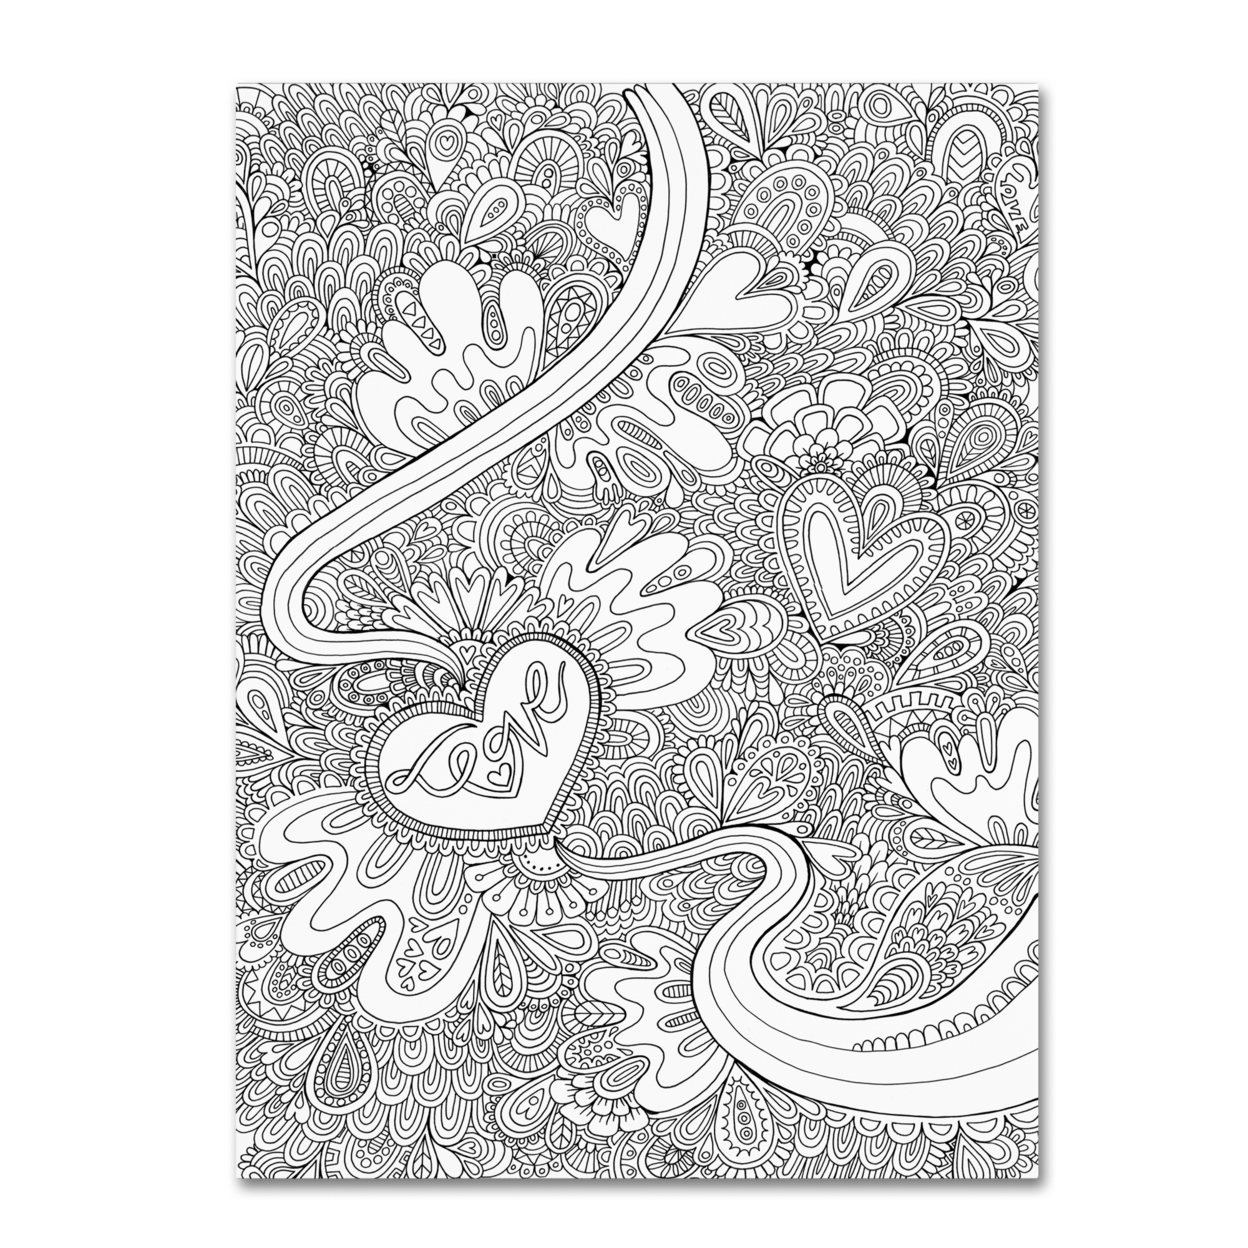 Hello Angel 'Love To Doodle Outlines' Canvas Wall Art 35 X 47 Inches